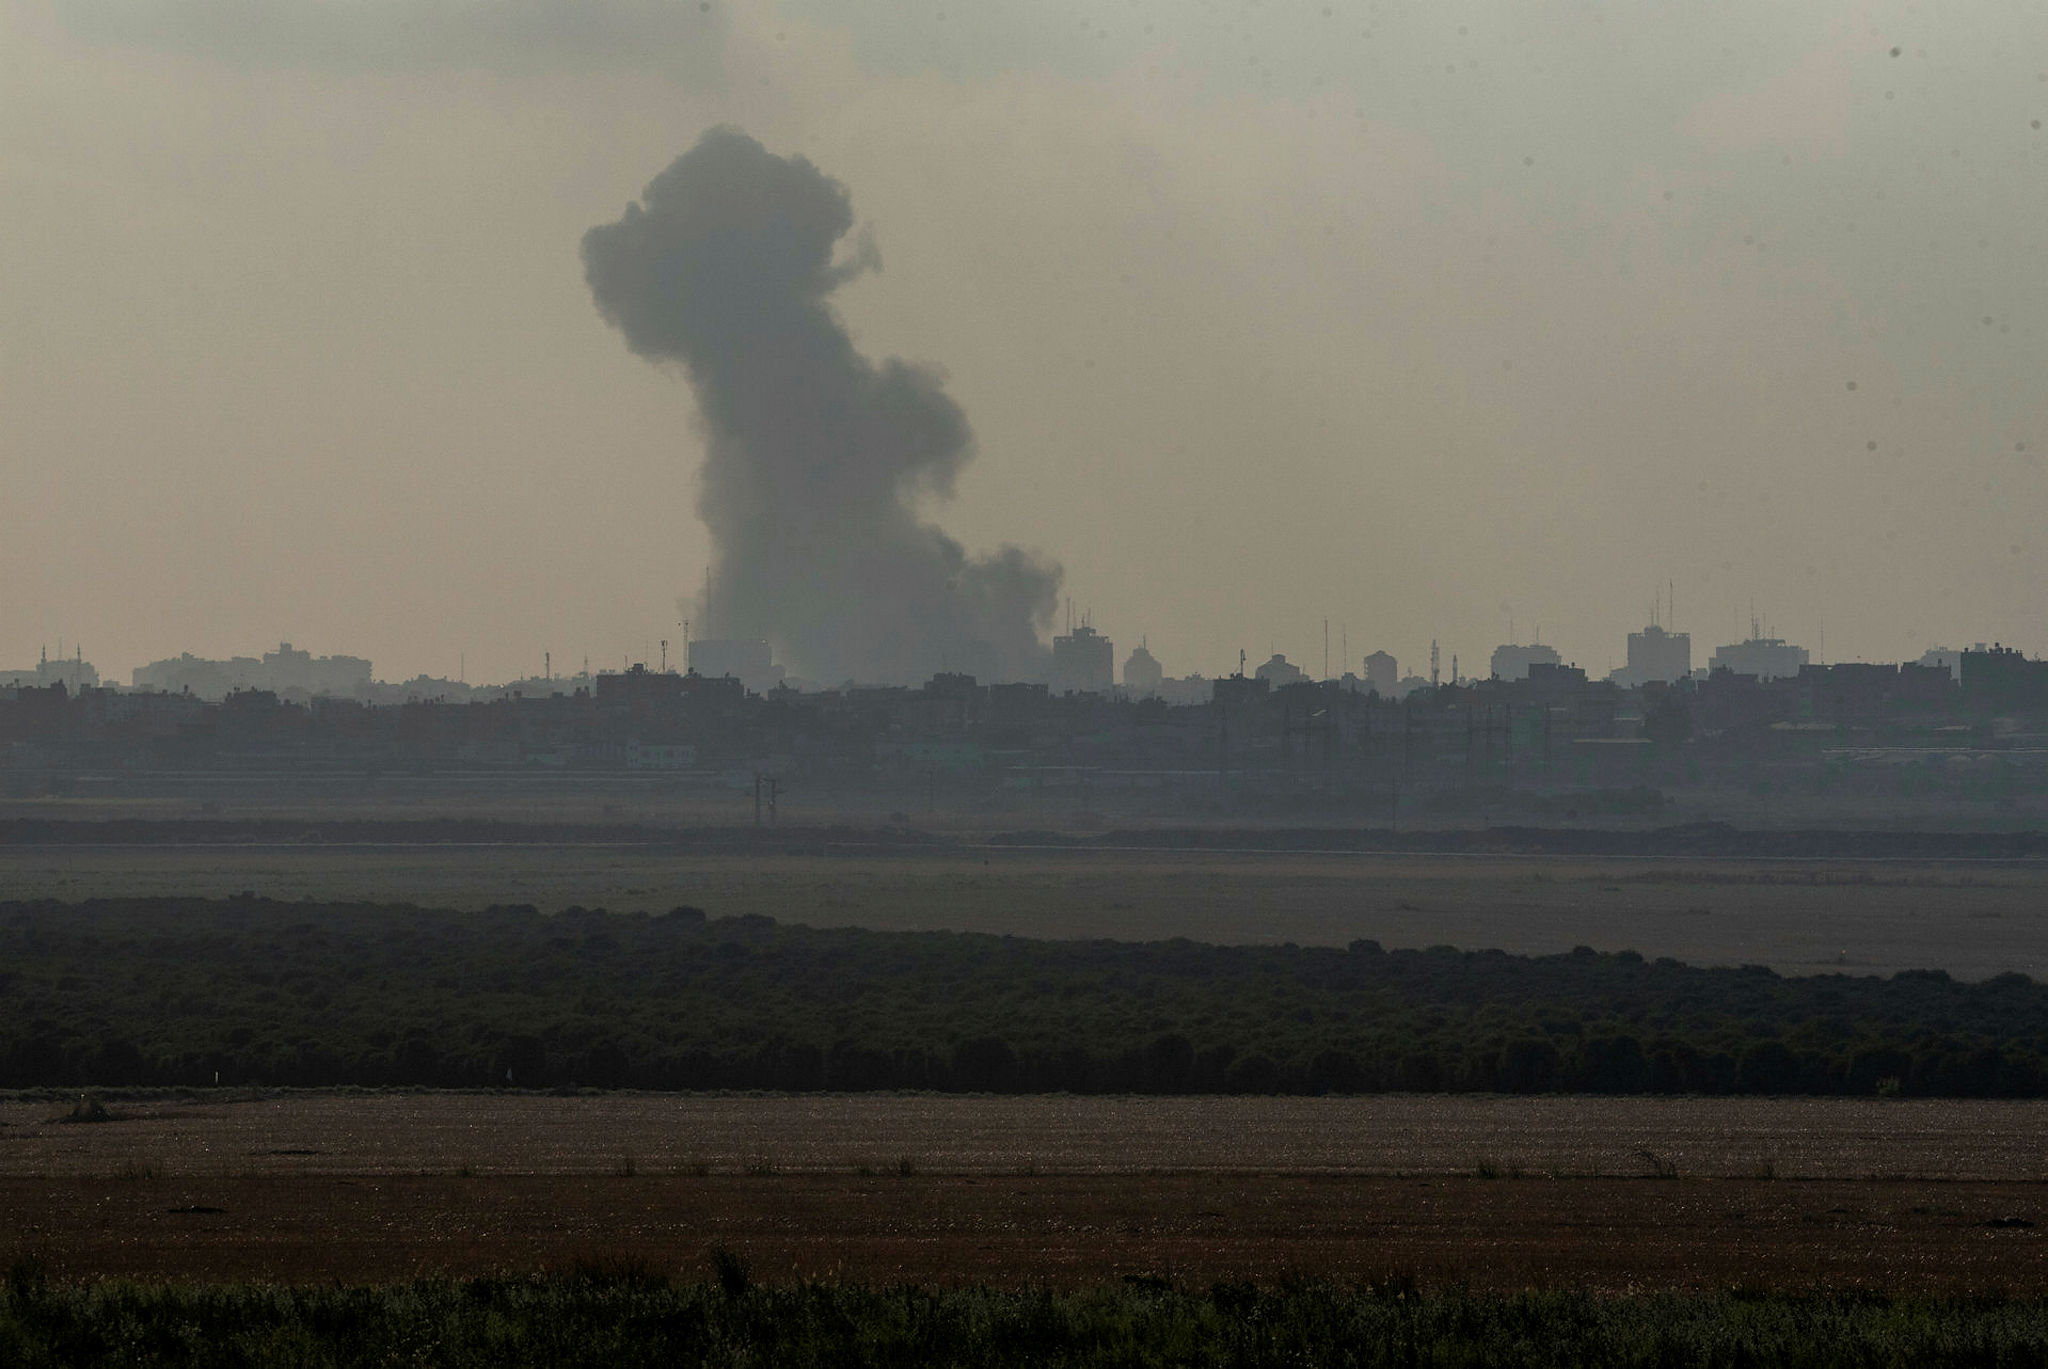 A view on Gaza during an IDF air force attack